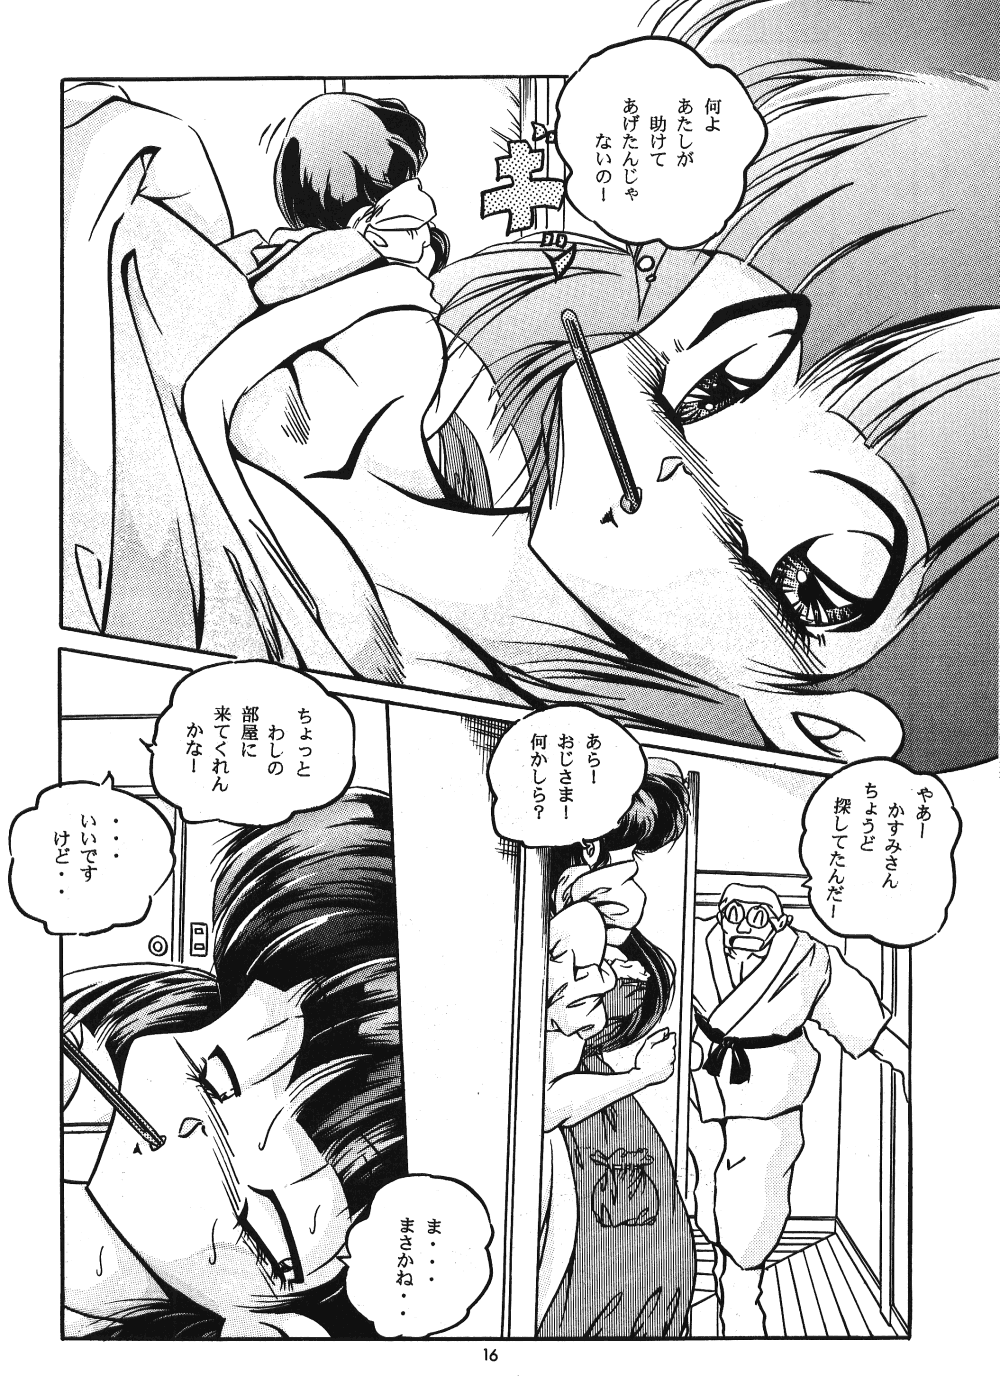 [C-COMPANY] C-COMPANY SPECIAL STAGE 18 (Ranma 1/2, Idol Project) page 17 full